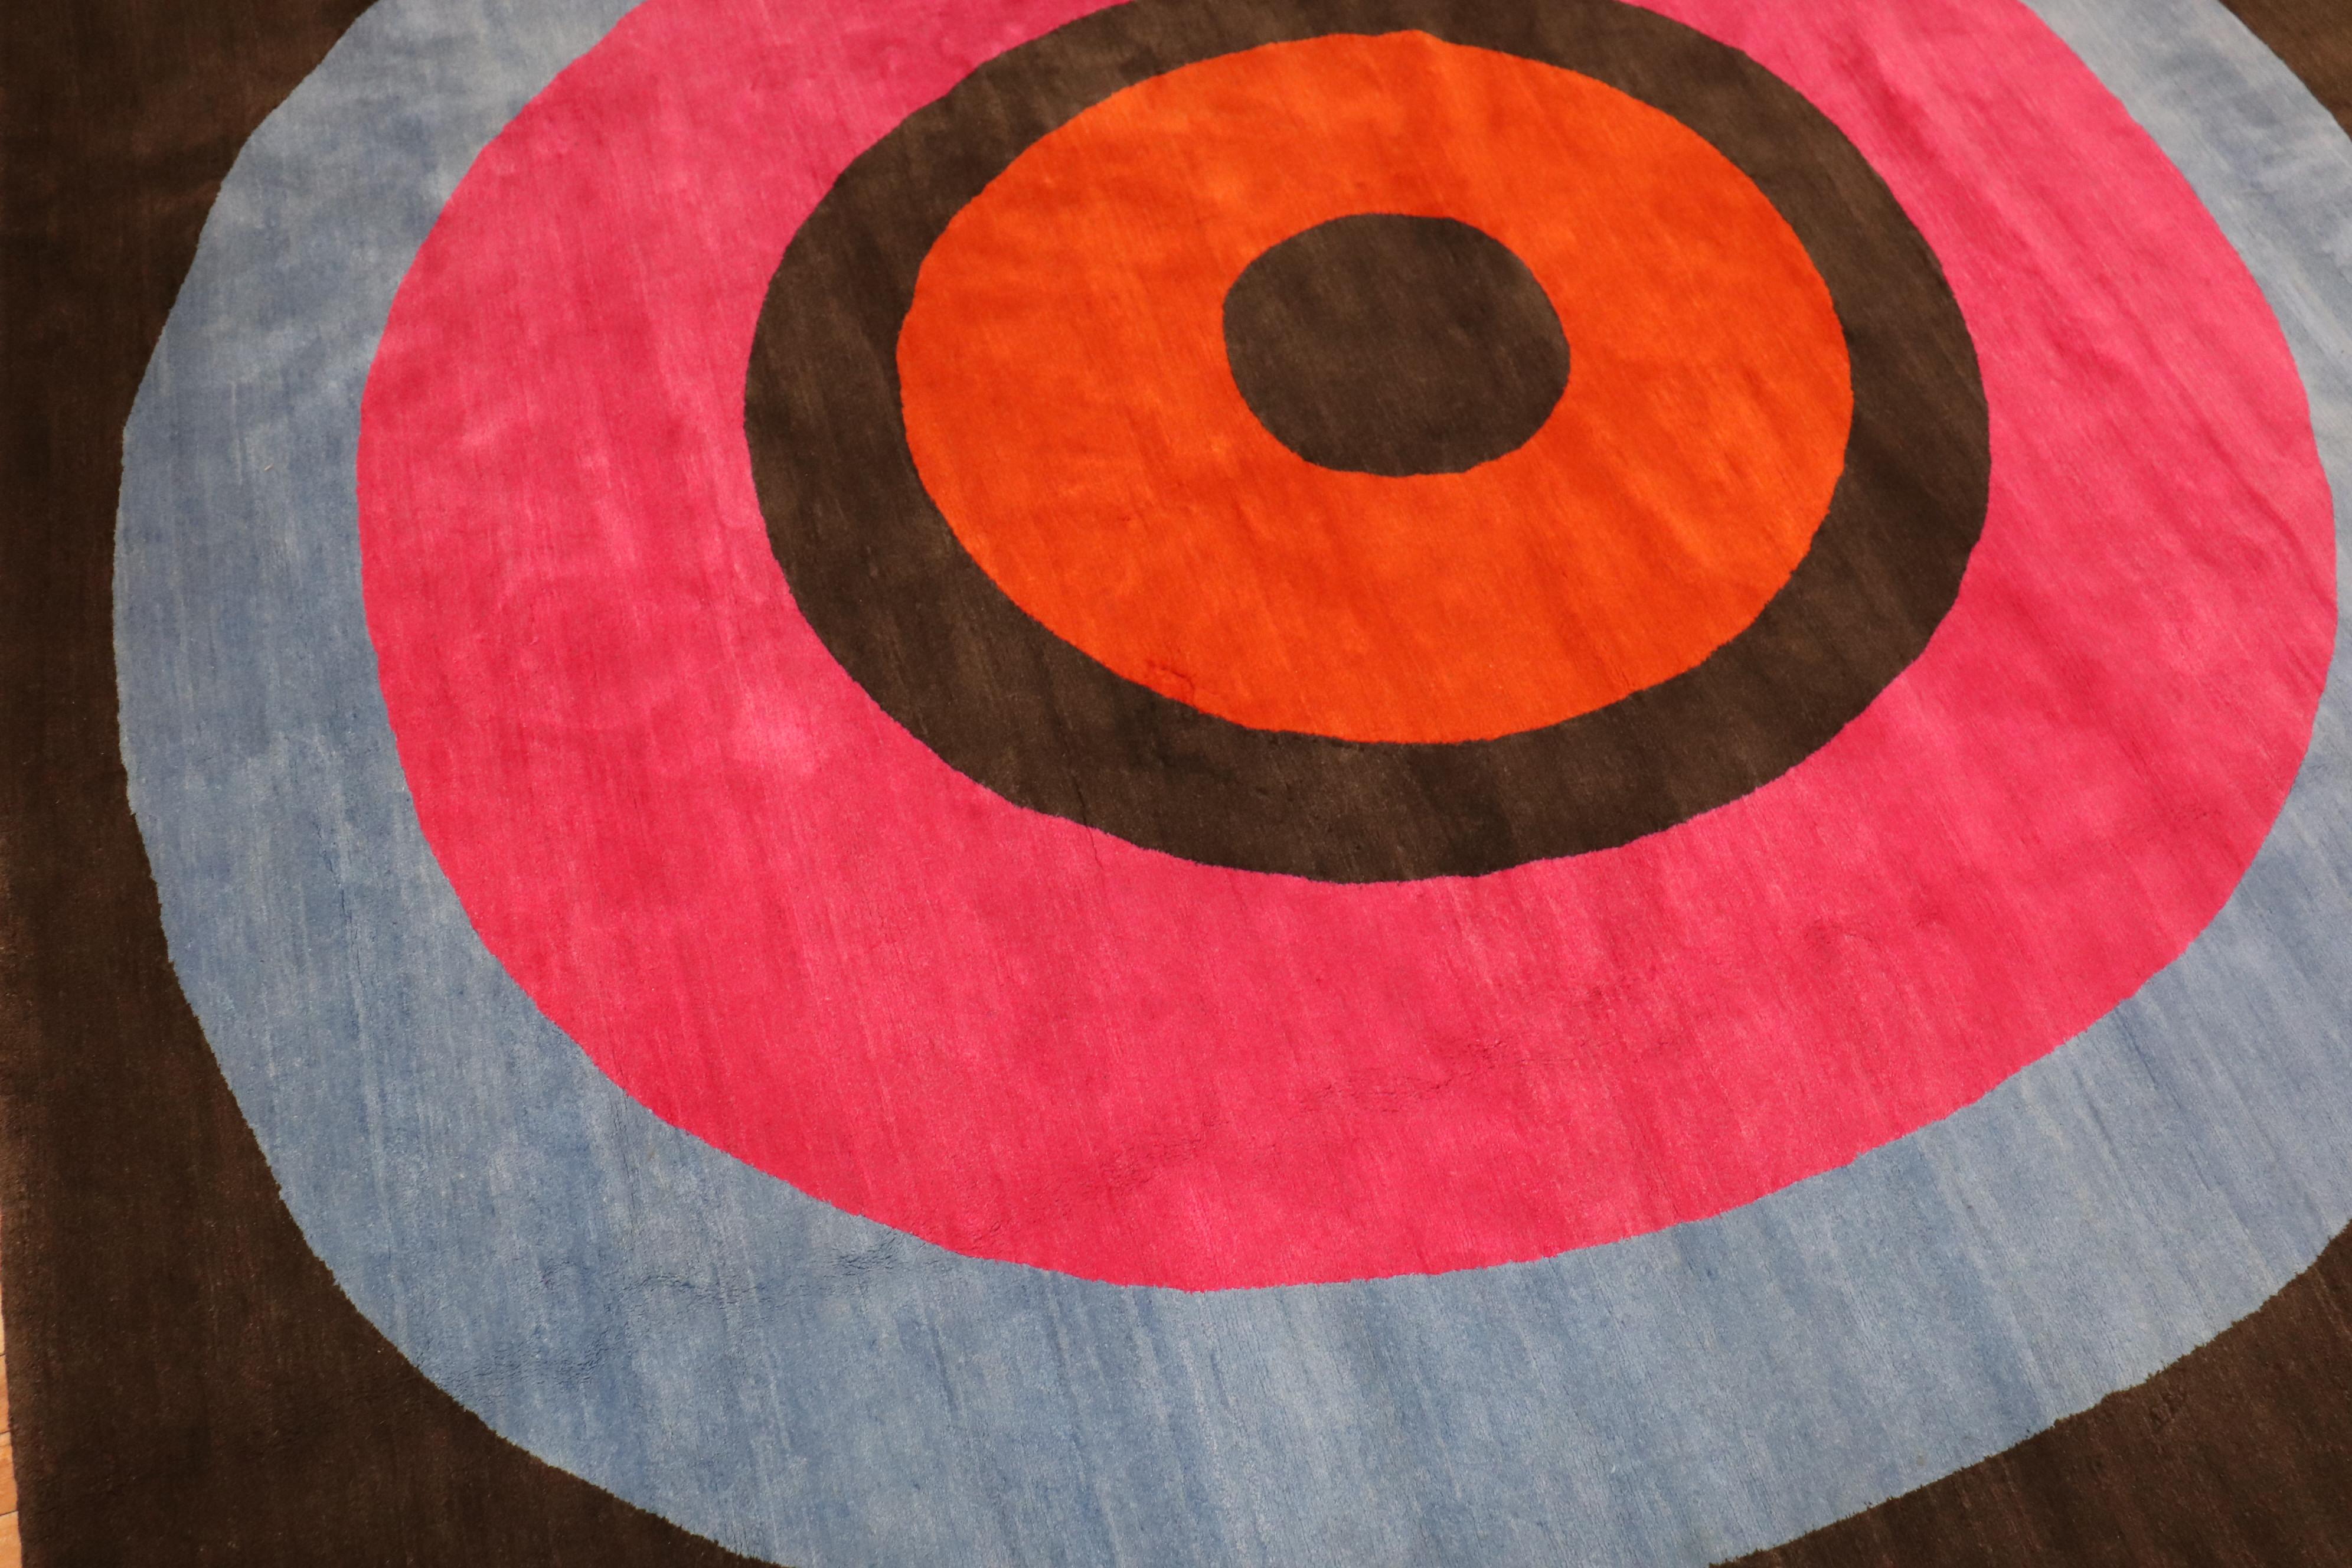 Late 20th-century wool Tibetan carpet with a large off-center bullseye on a brown field

Measures: 11'8